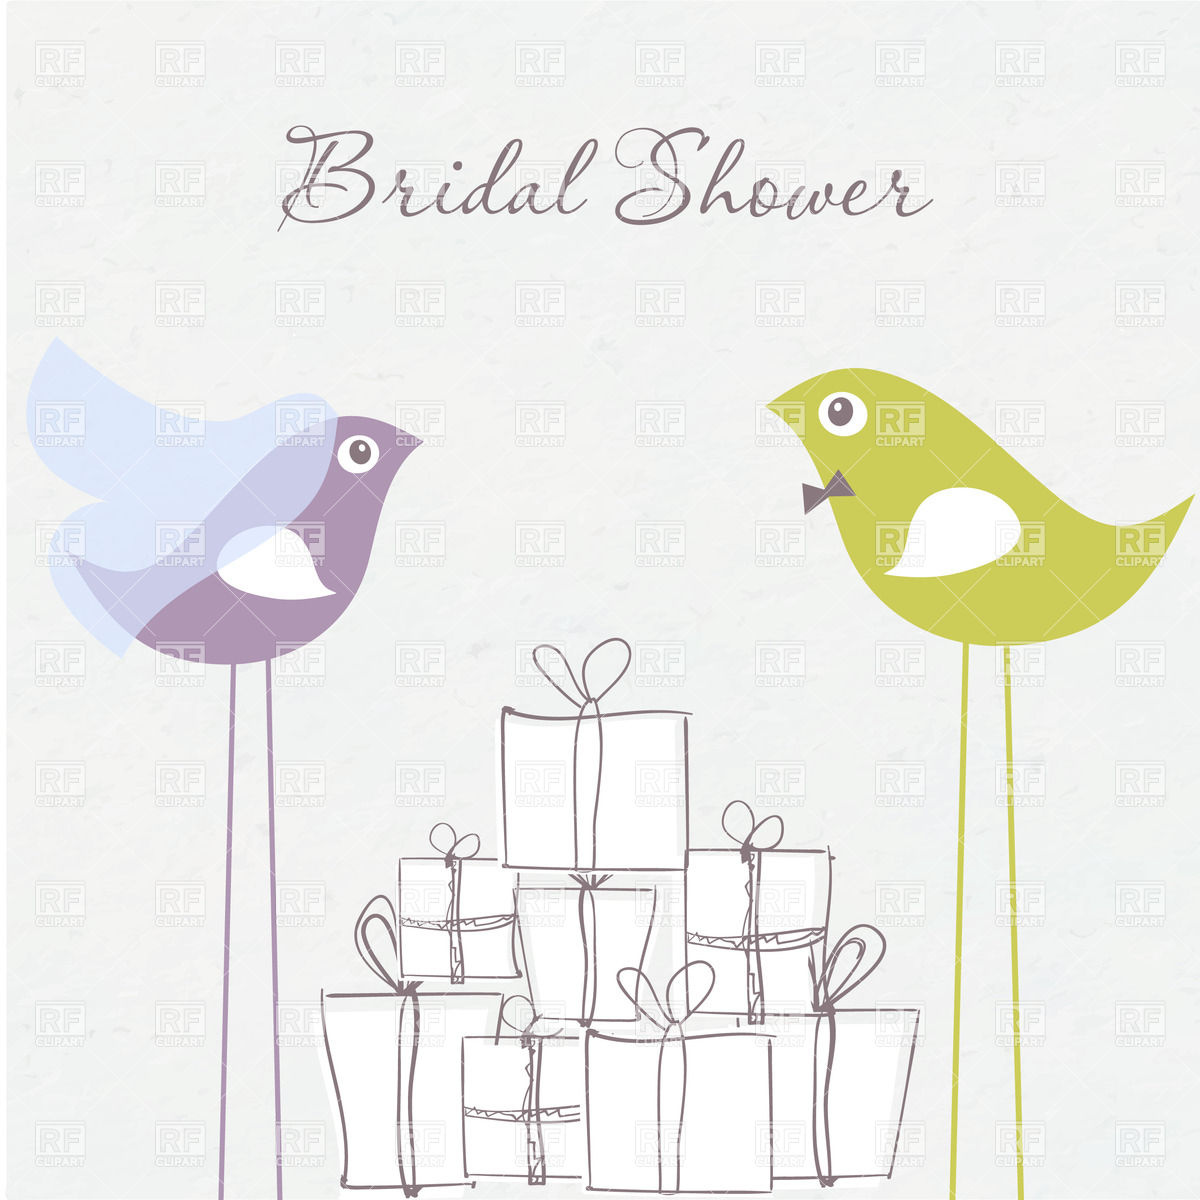 Bridal Shower Invitation   Birds In Bride And Groom Costumes And Gift